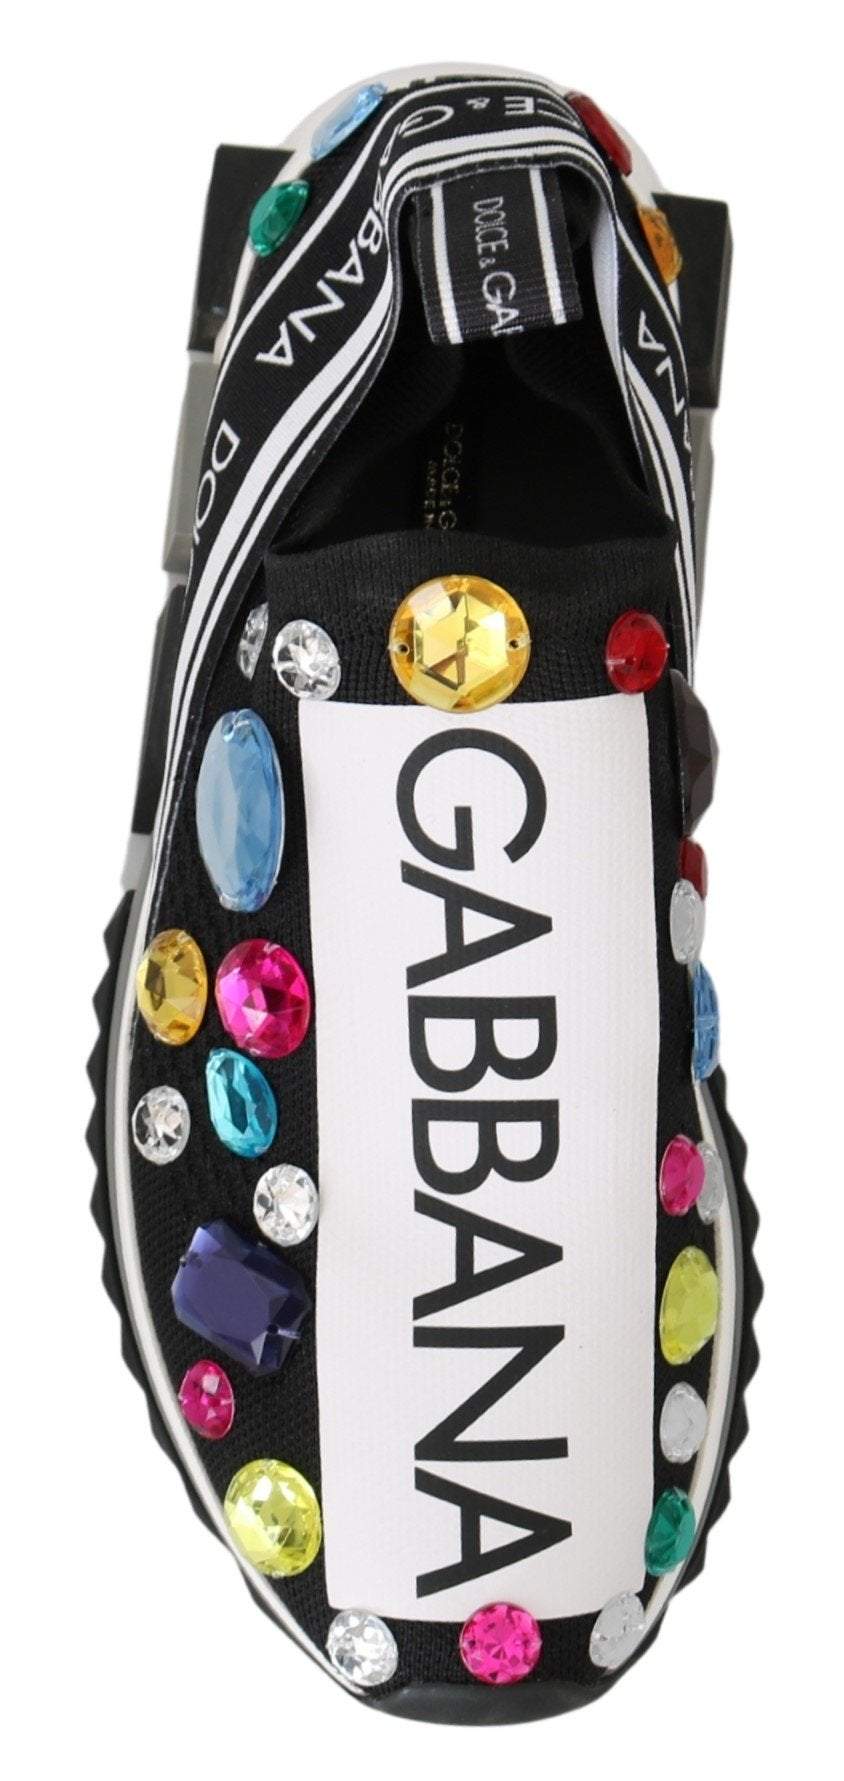 Dolce & Gabbana Black Multicolor Crystal Sneakers Shoes #women, Black, EU39/US8.5, feed-agegroup-adult, feed-color-black, feed-gender-female, feed-size-US4.5, feed-size-US5, feed-size-US5.5, feed-size-US6, feed-size-US6.5, feed-size-US7.5, Shoes - New Arrivals, Sneakers - Women - Shoes at SEYMAYKA